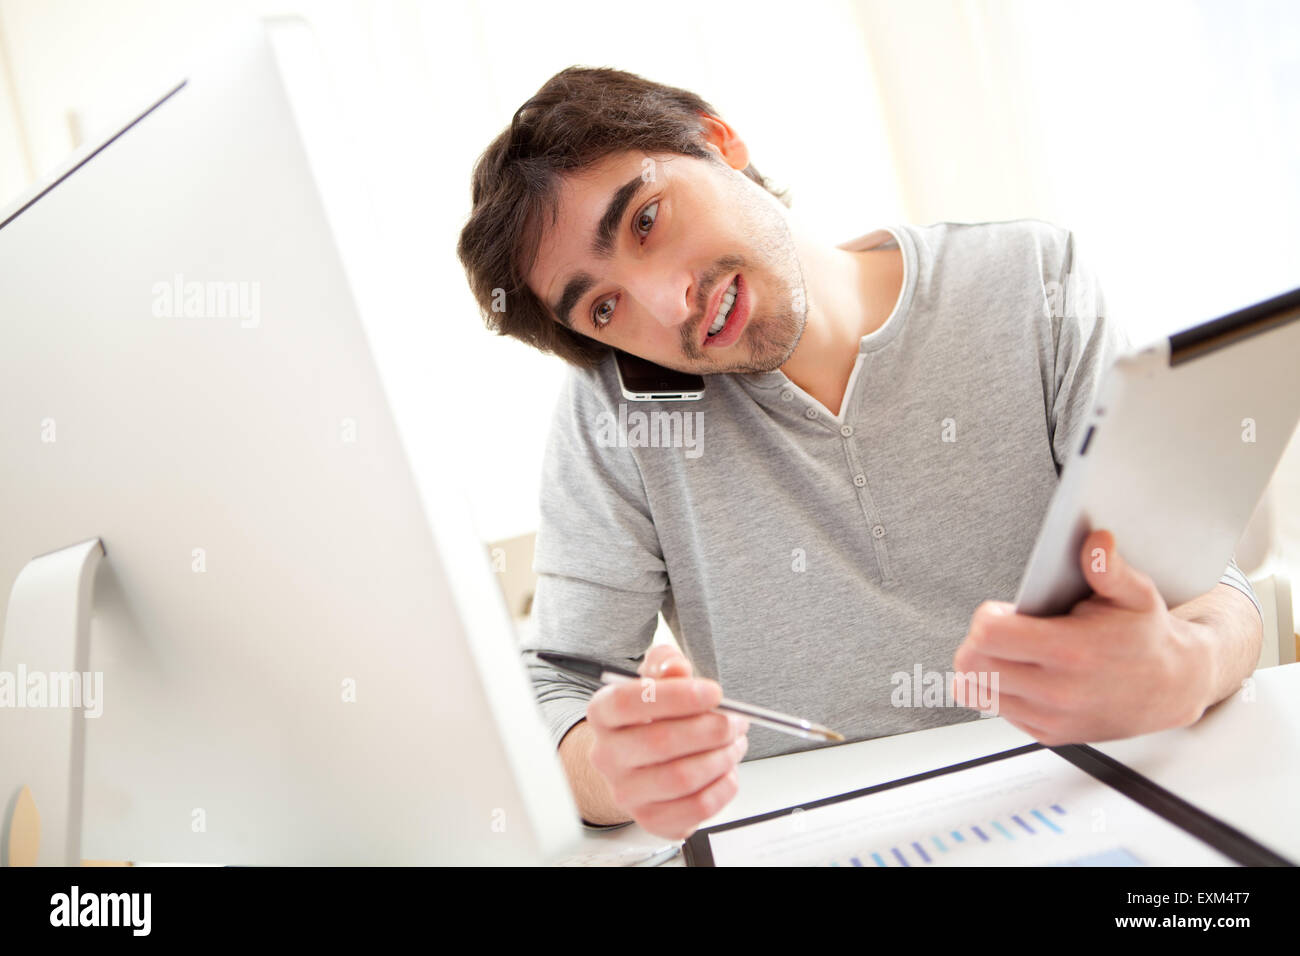 View of a young busy men at the office using tablet and smartphone Stock Photo